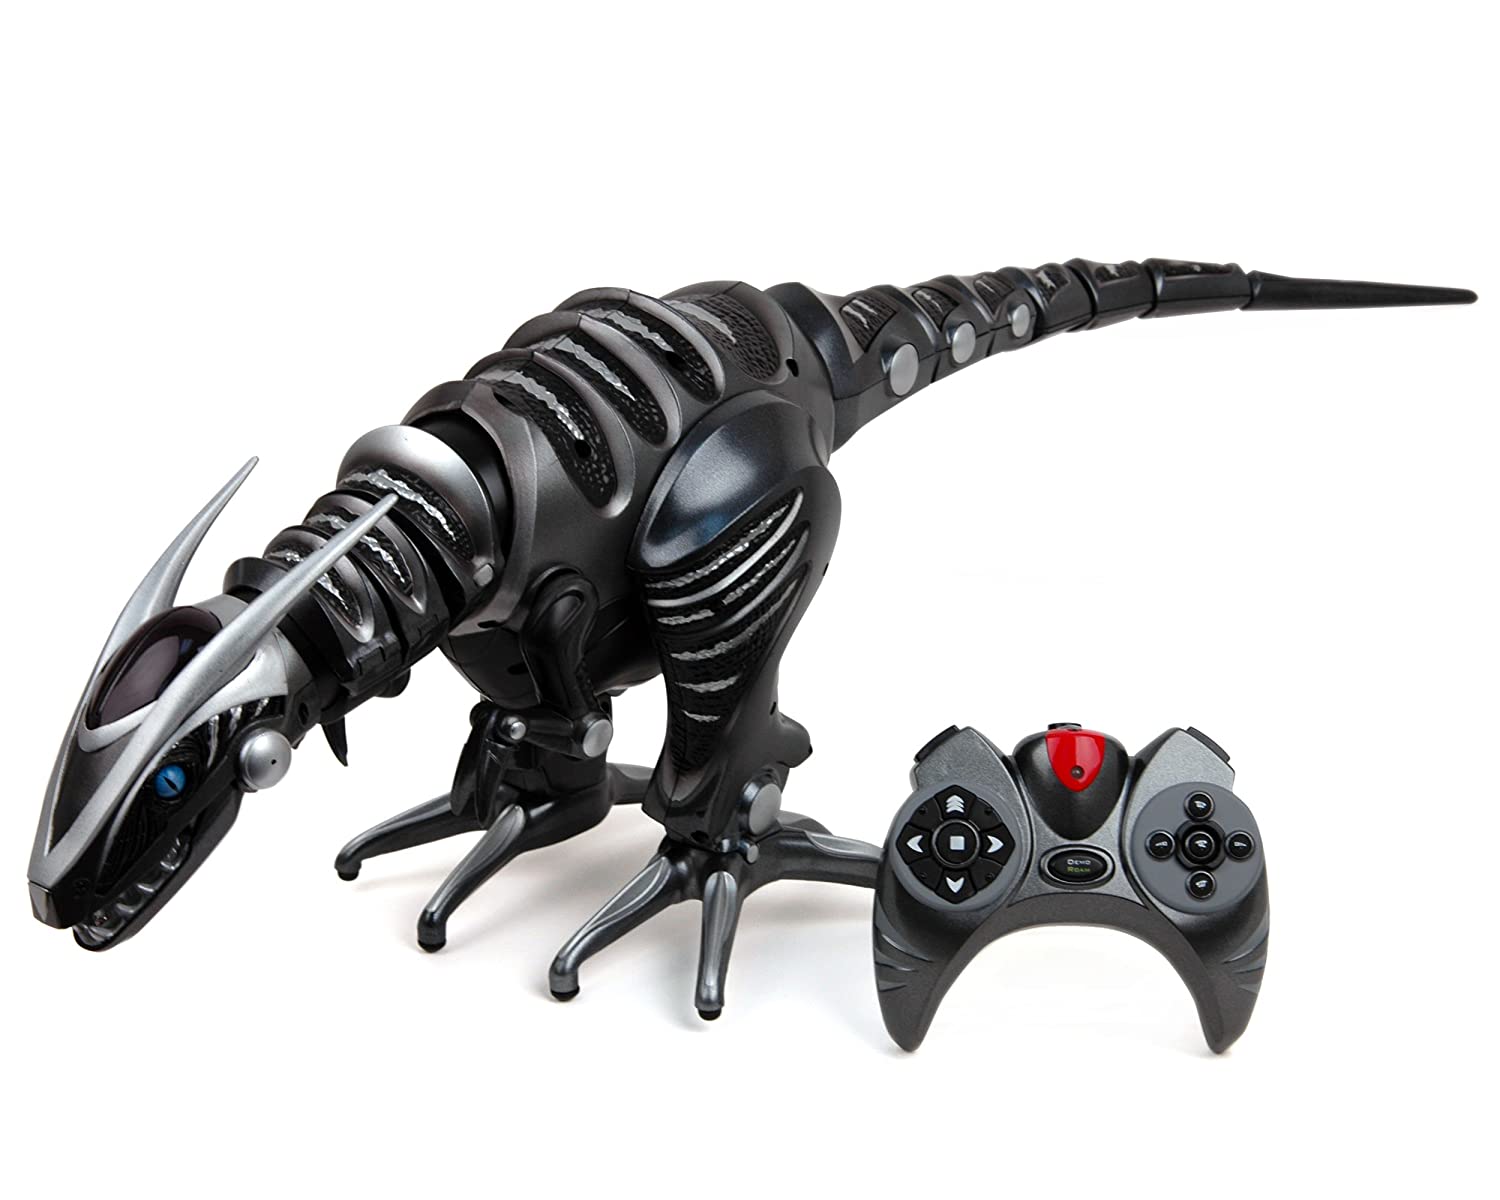 Top 7 Best Robot Dinosaur Toys Reviews in 2022 1